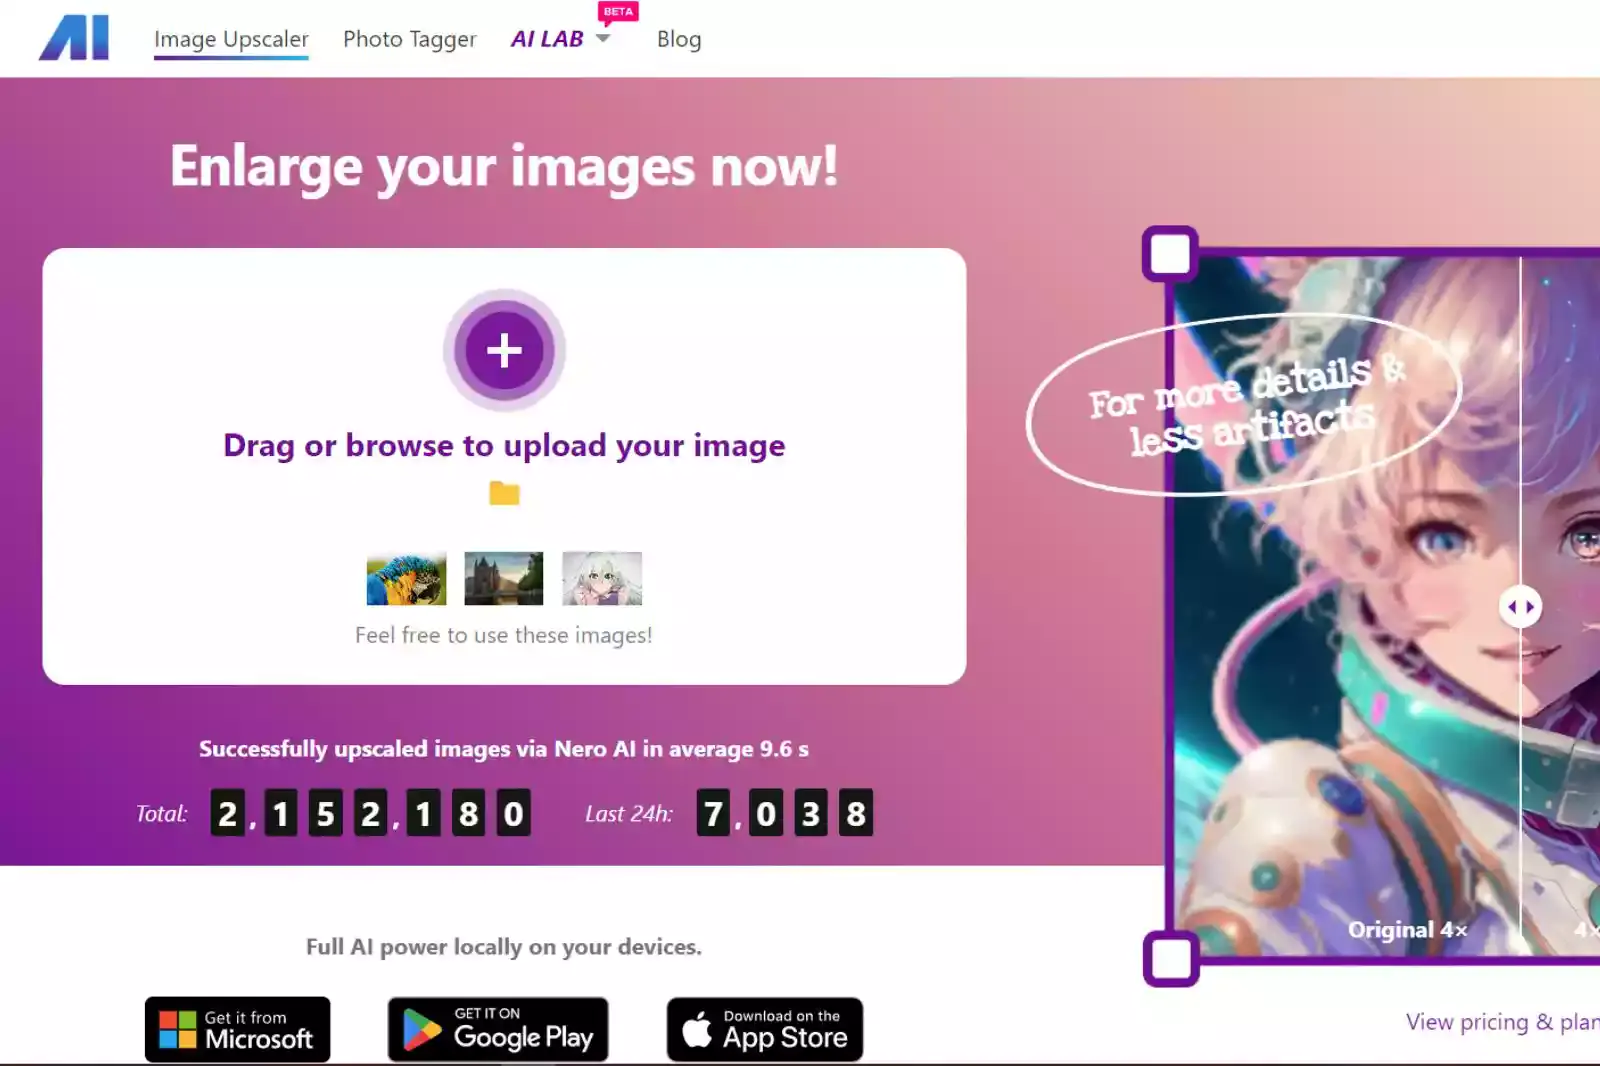 Home Page of Lens - AI Image Upscaler